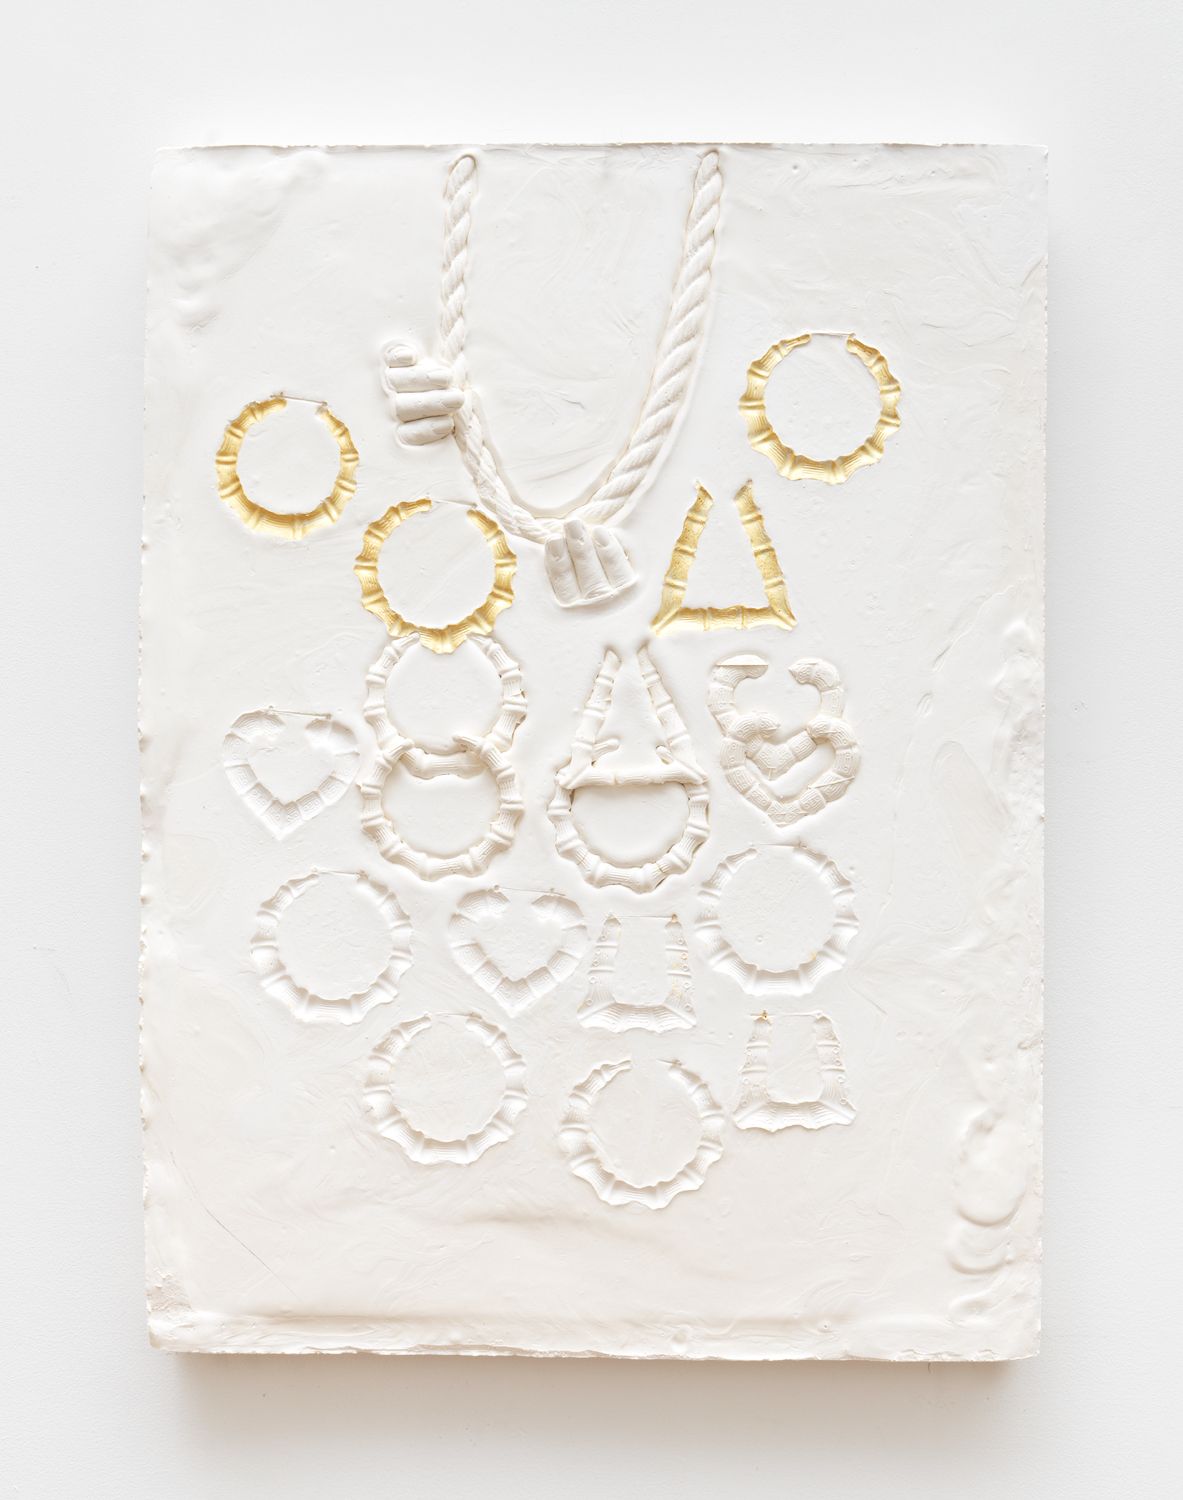 LaKela Brown, Composition with hands, chain, round earrings, heart earrings and bamboo earrings, 2019, plaster and acrylic, 29 x 21 1⁄2 x 3 in. (73.66 x 54.61 x 7.62 cm) 